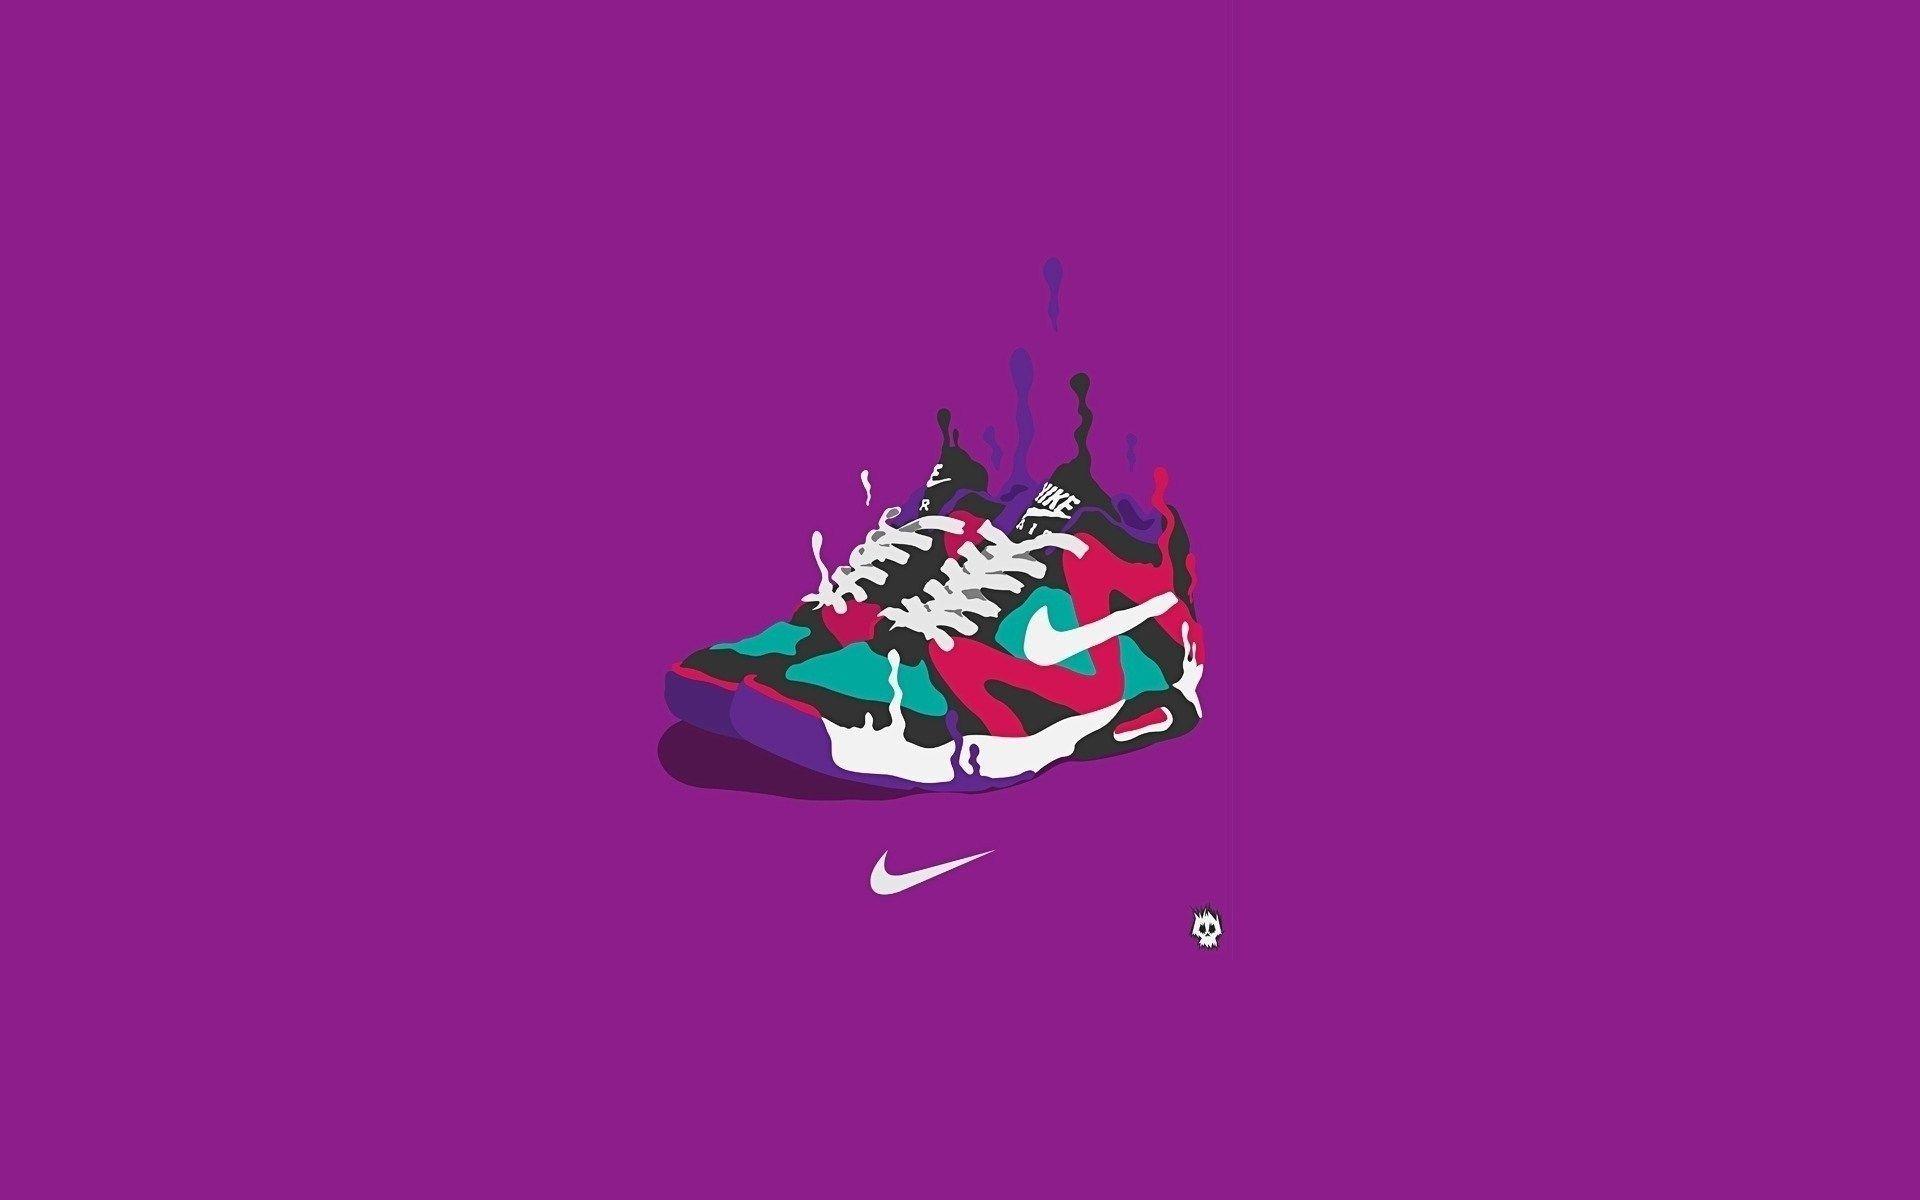 Find out: Nike Basketball Shoes Art wallpaper